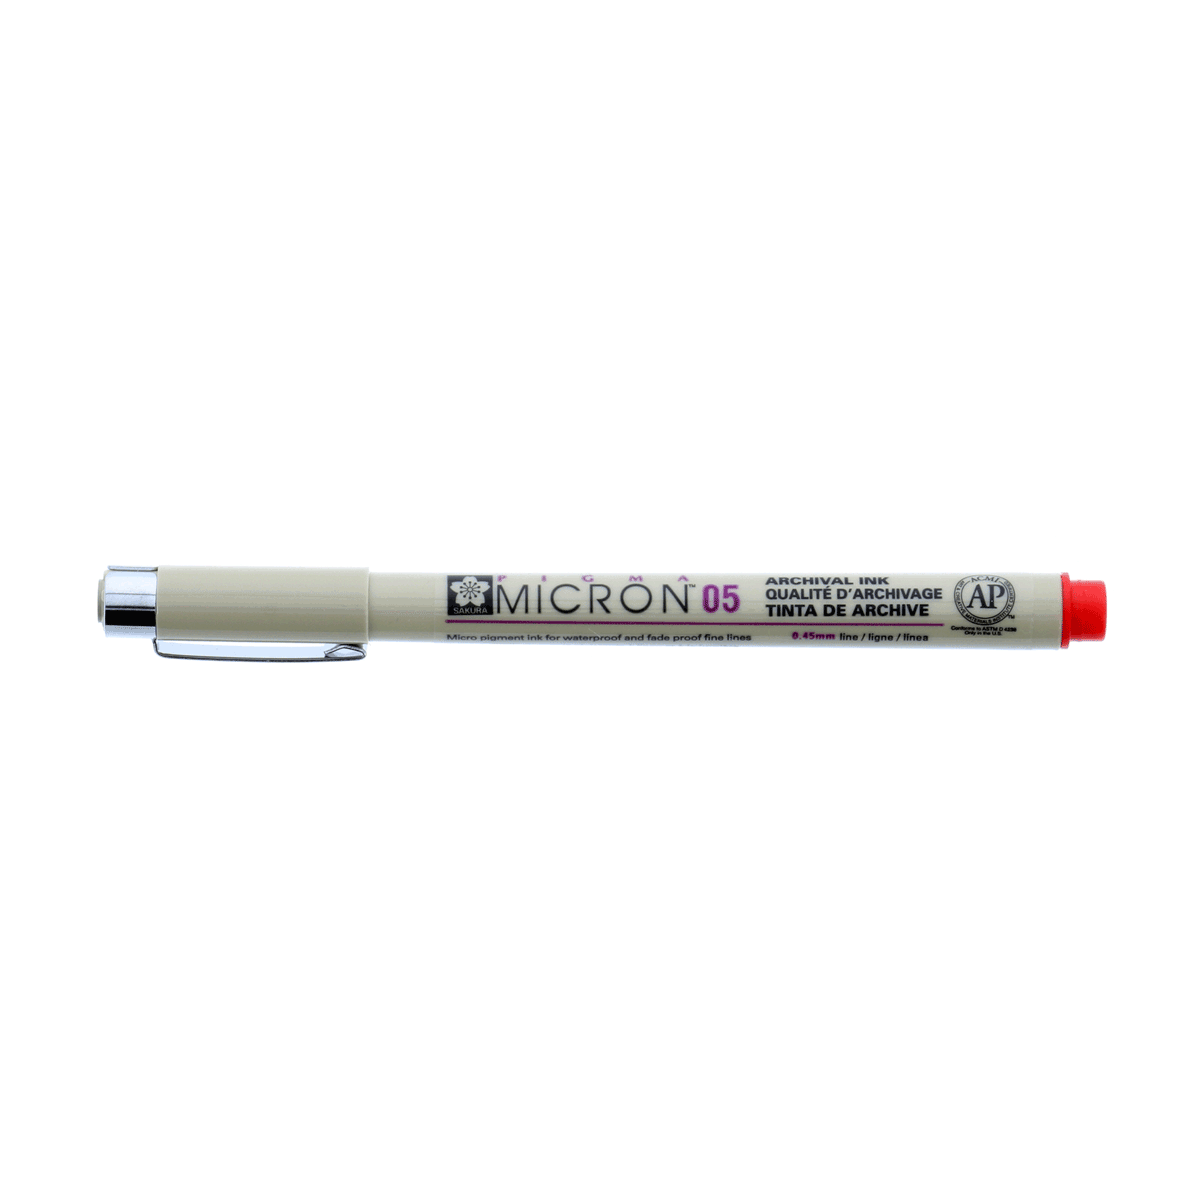 Micron Pigma Pen - Red 05 .45mm Line